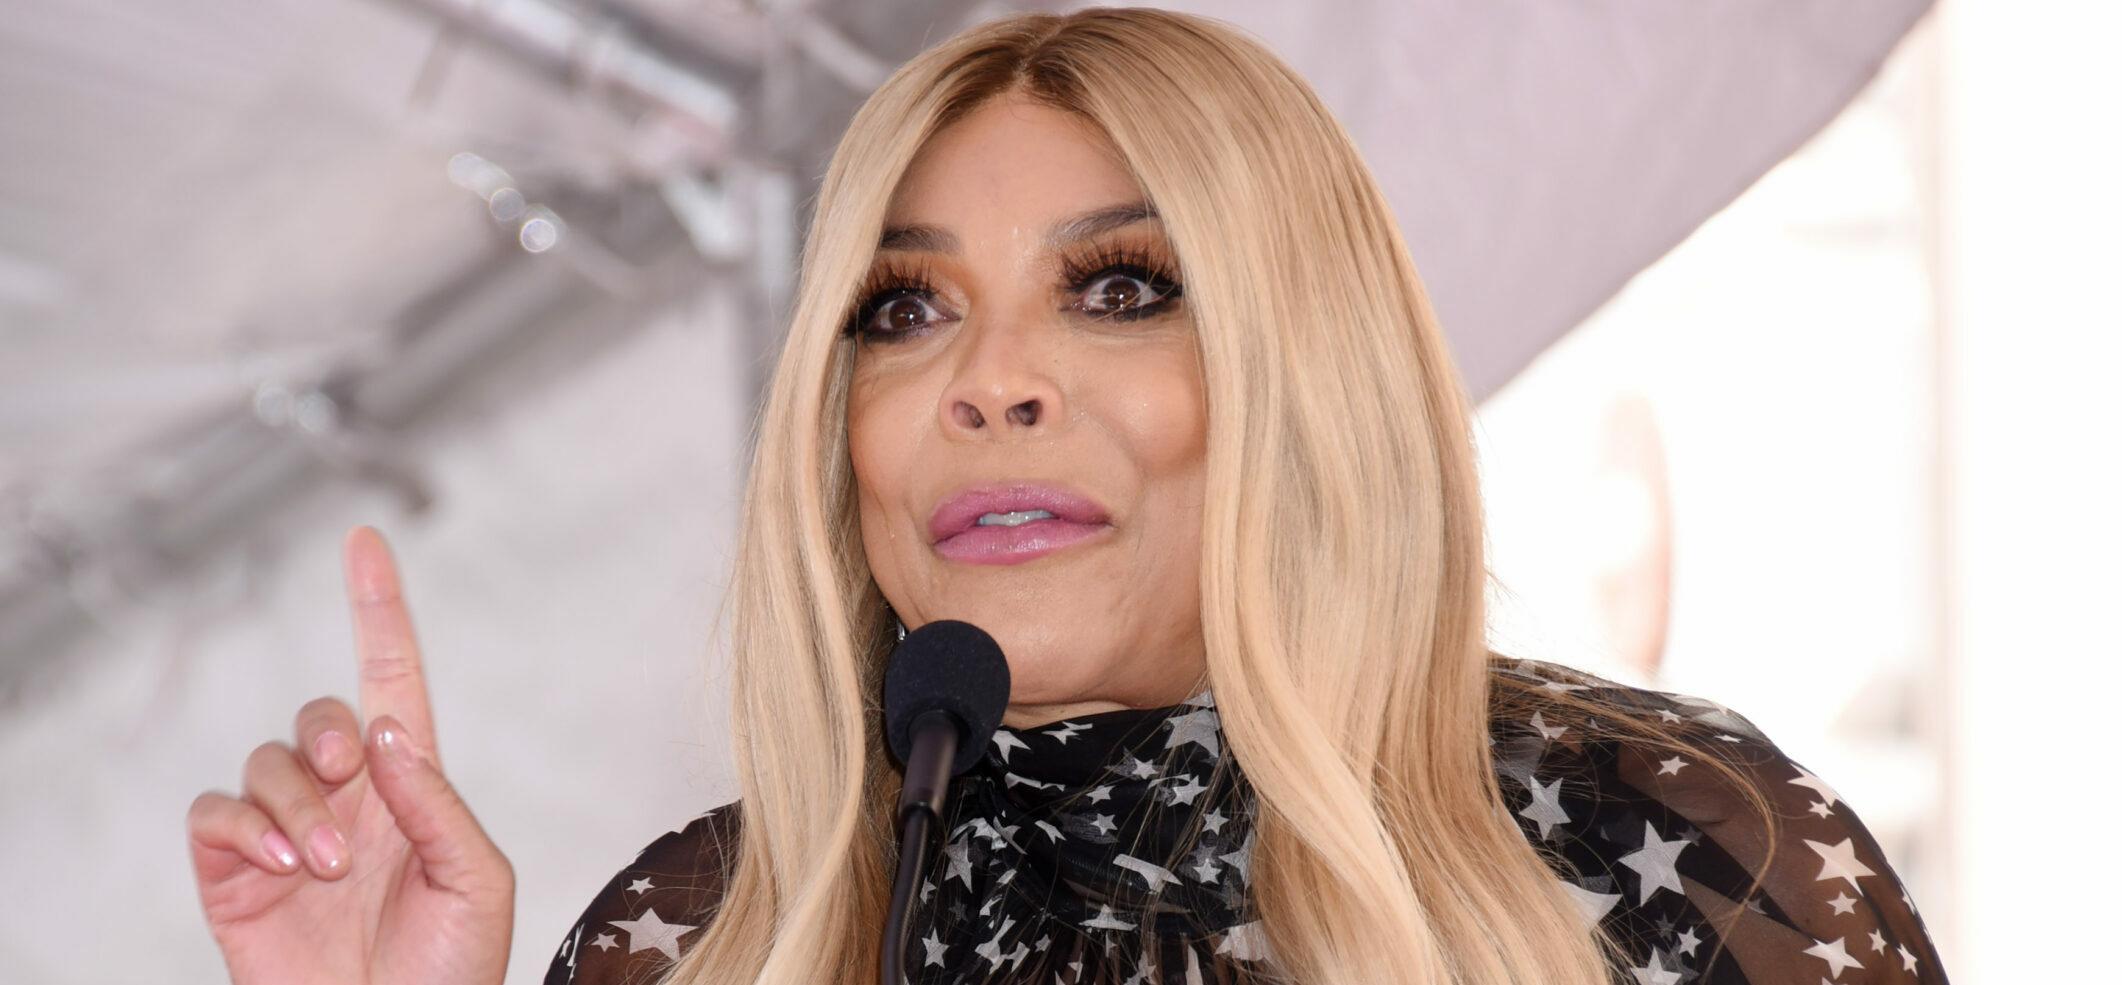 Wendy Williams Bails On $25,000 Gig After Fears Of Shaky Health